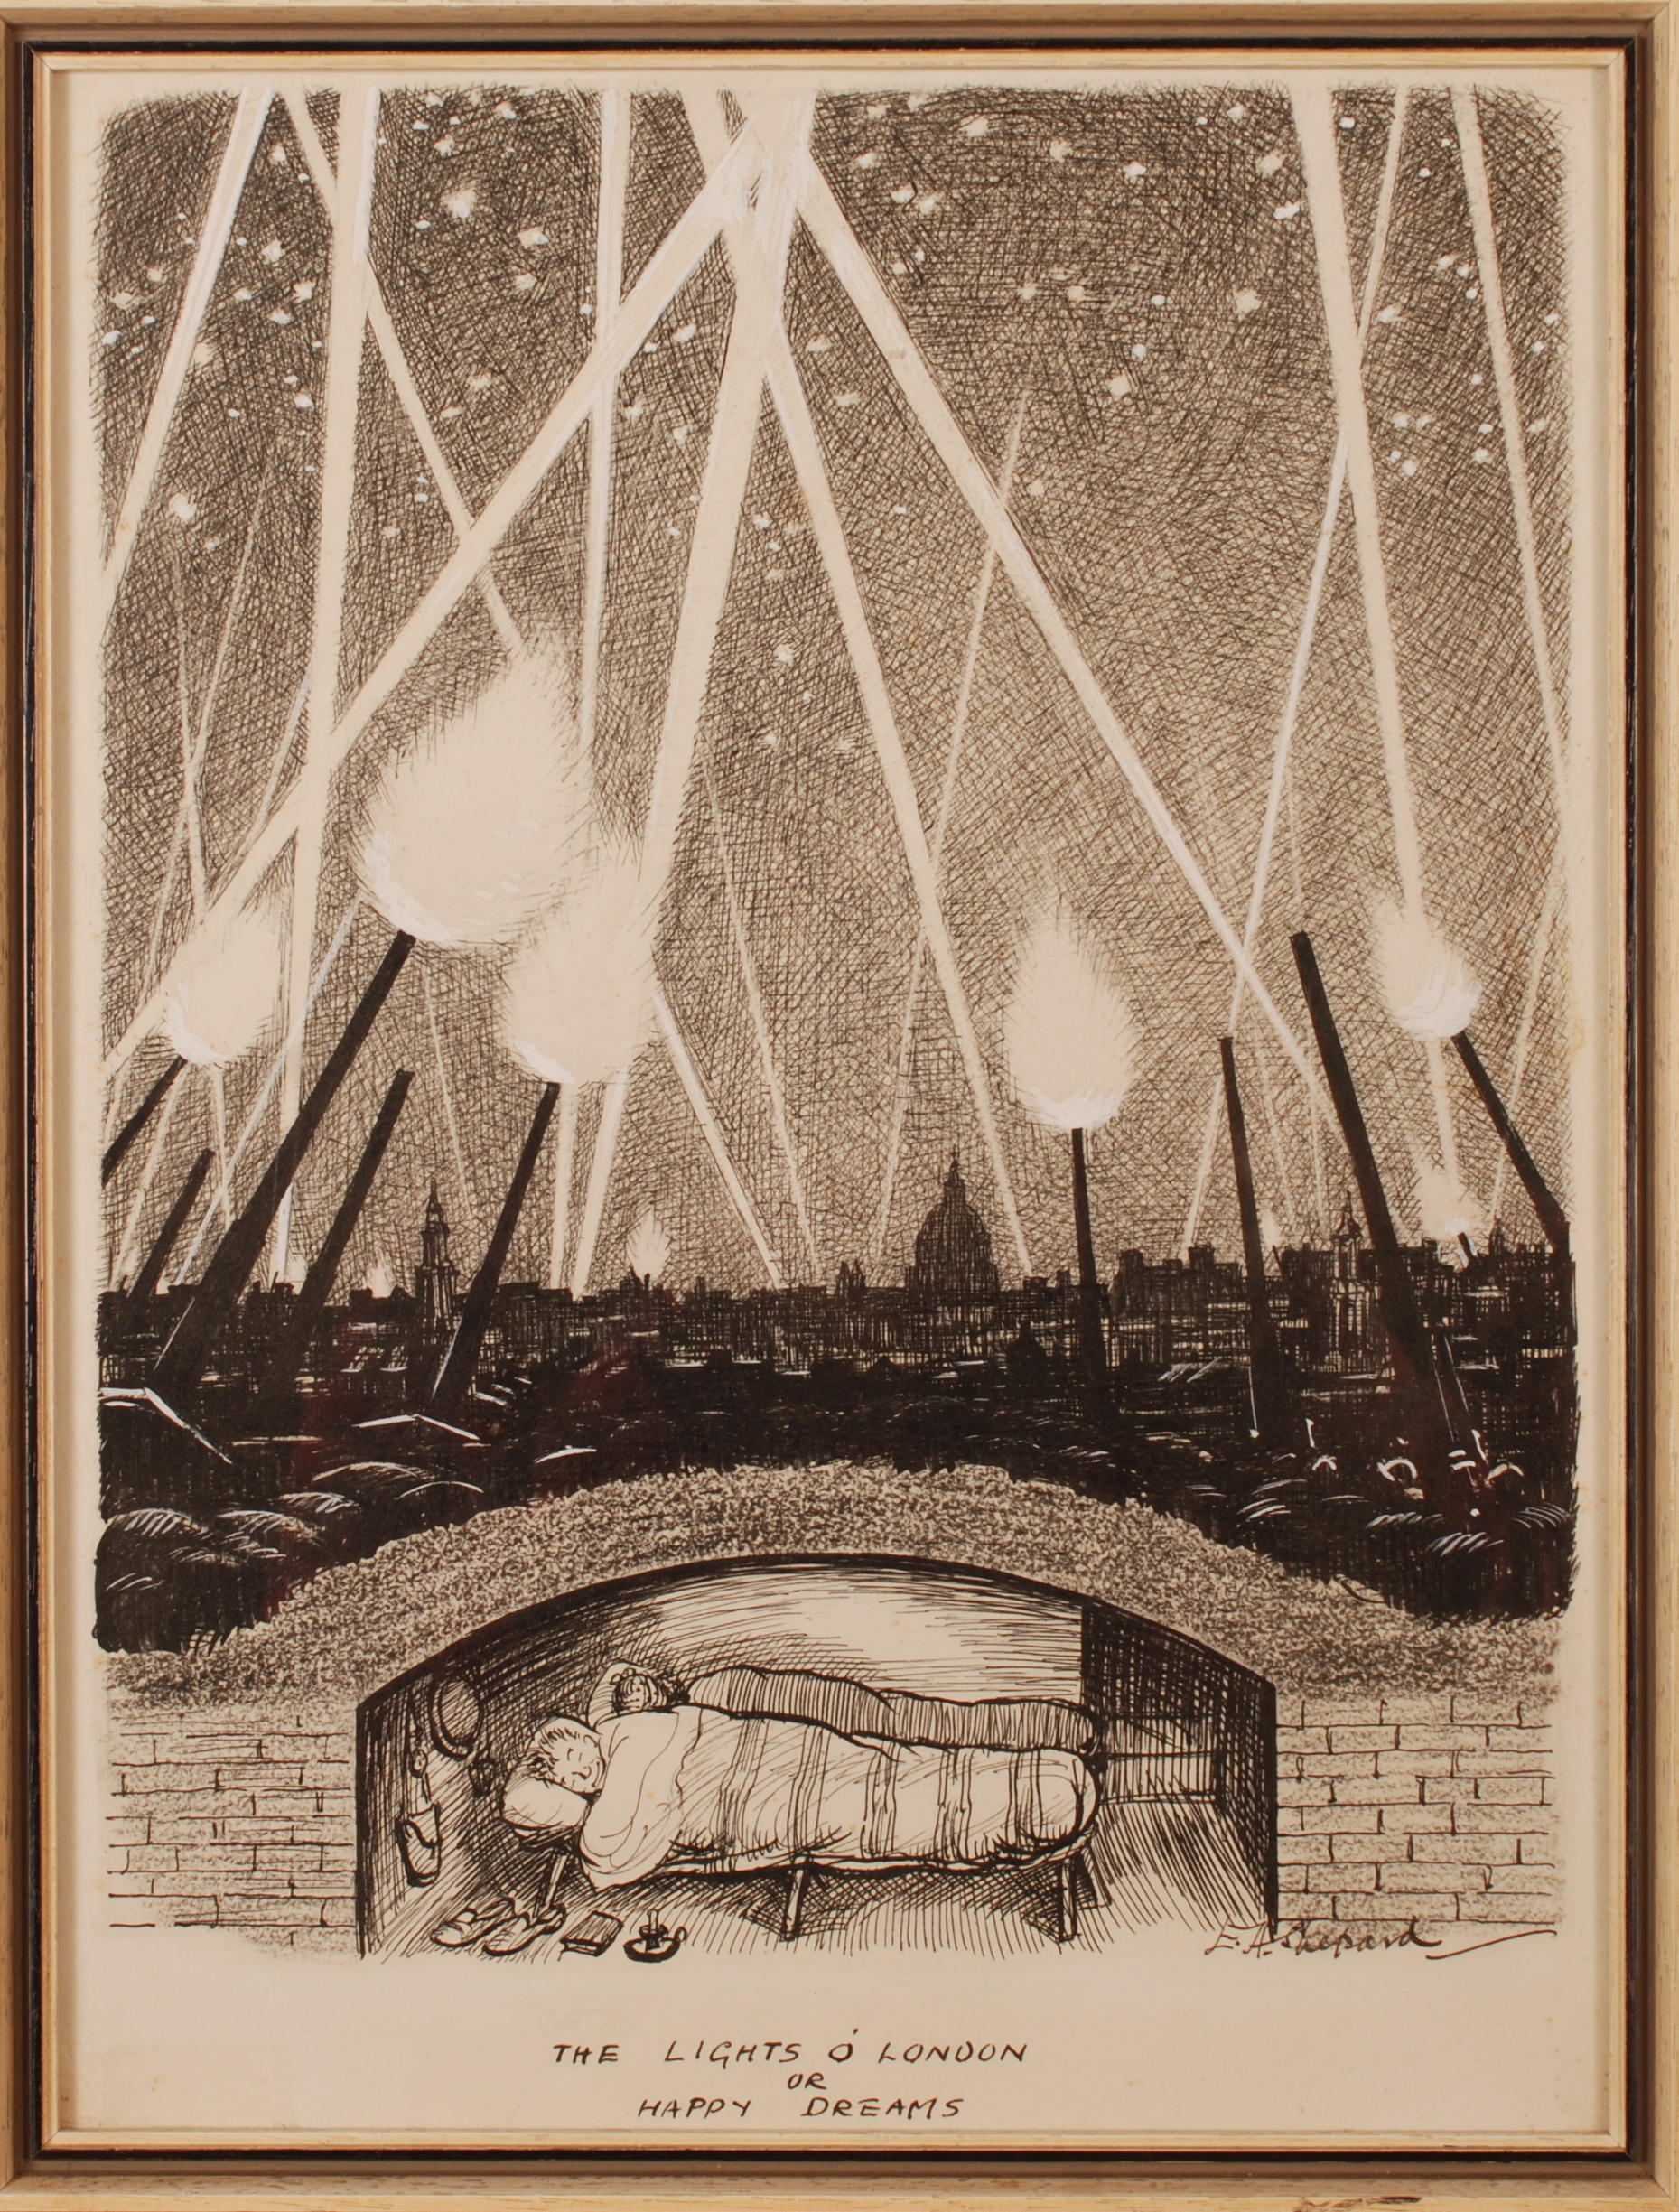 ERNEST HOWARD SHEPARD
The Lights O' London or Happy Dreams
Ink drawing heightened with white gouache